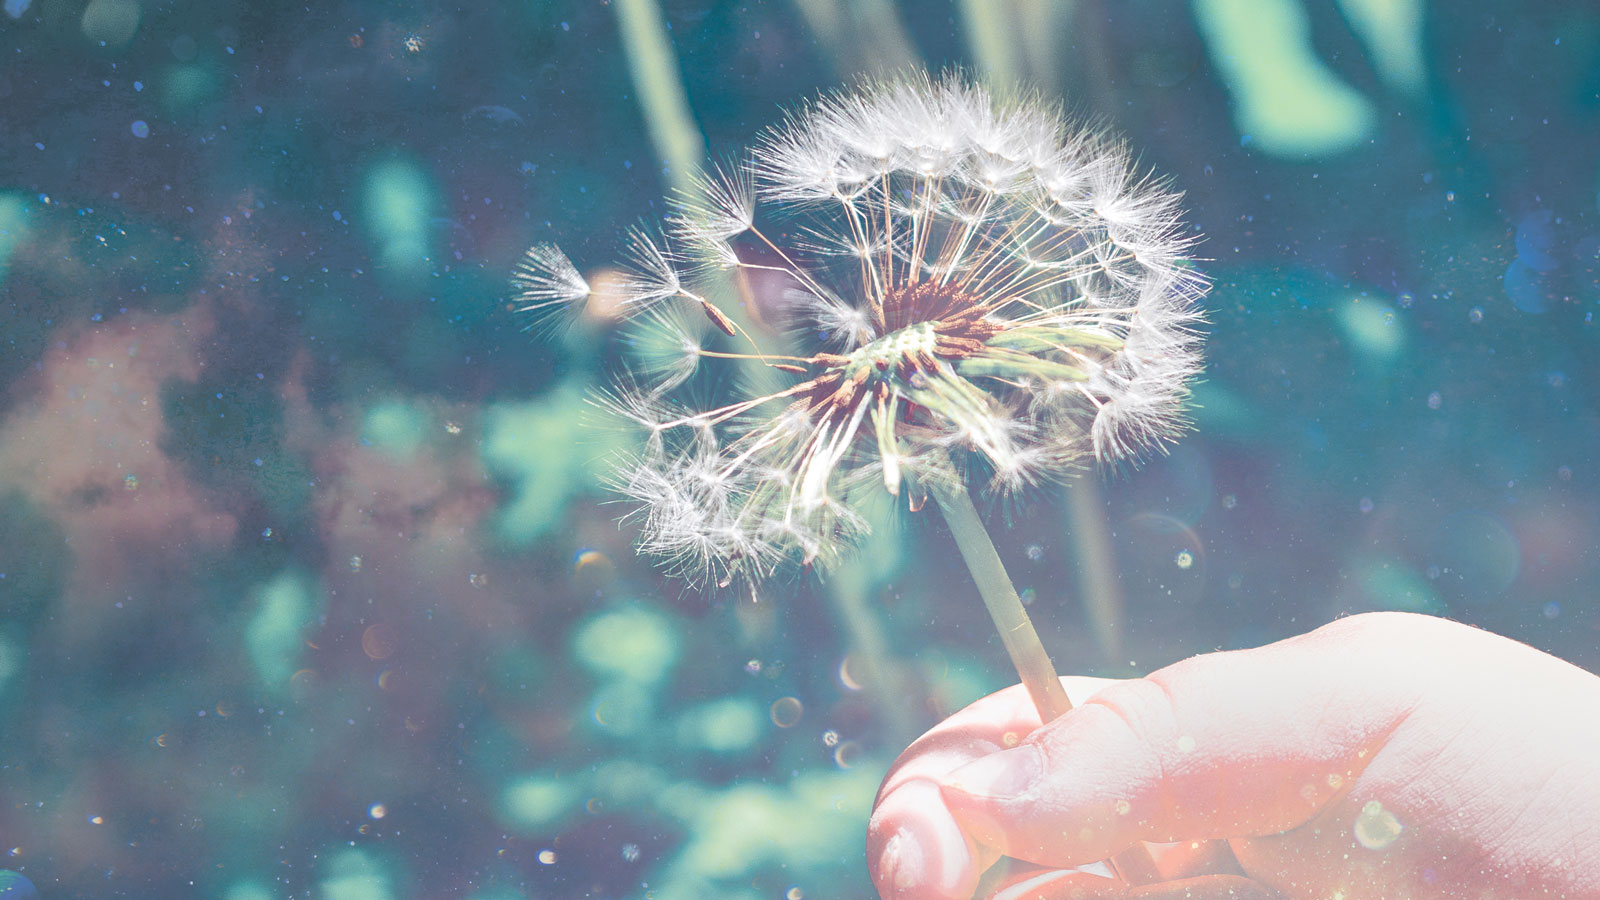 A Child's Hand Holding a Dandelion